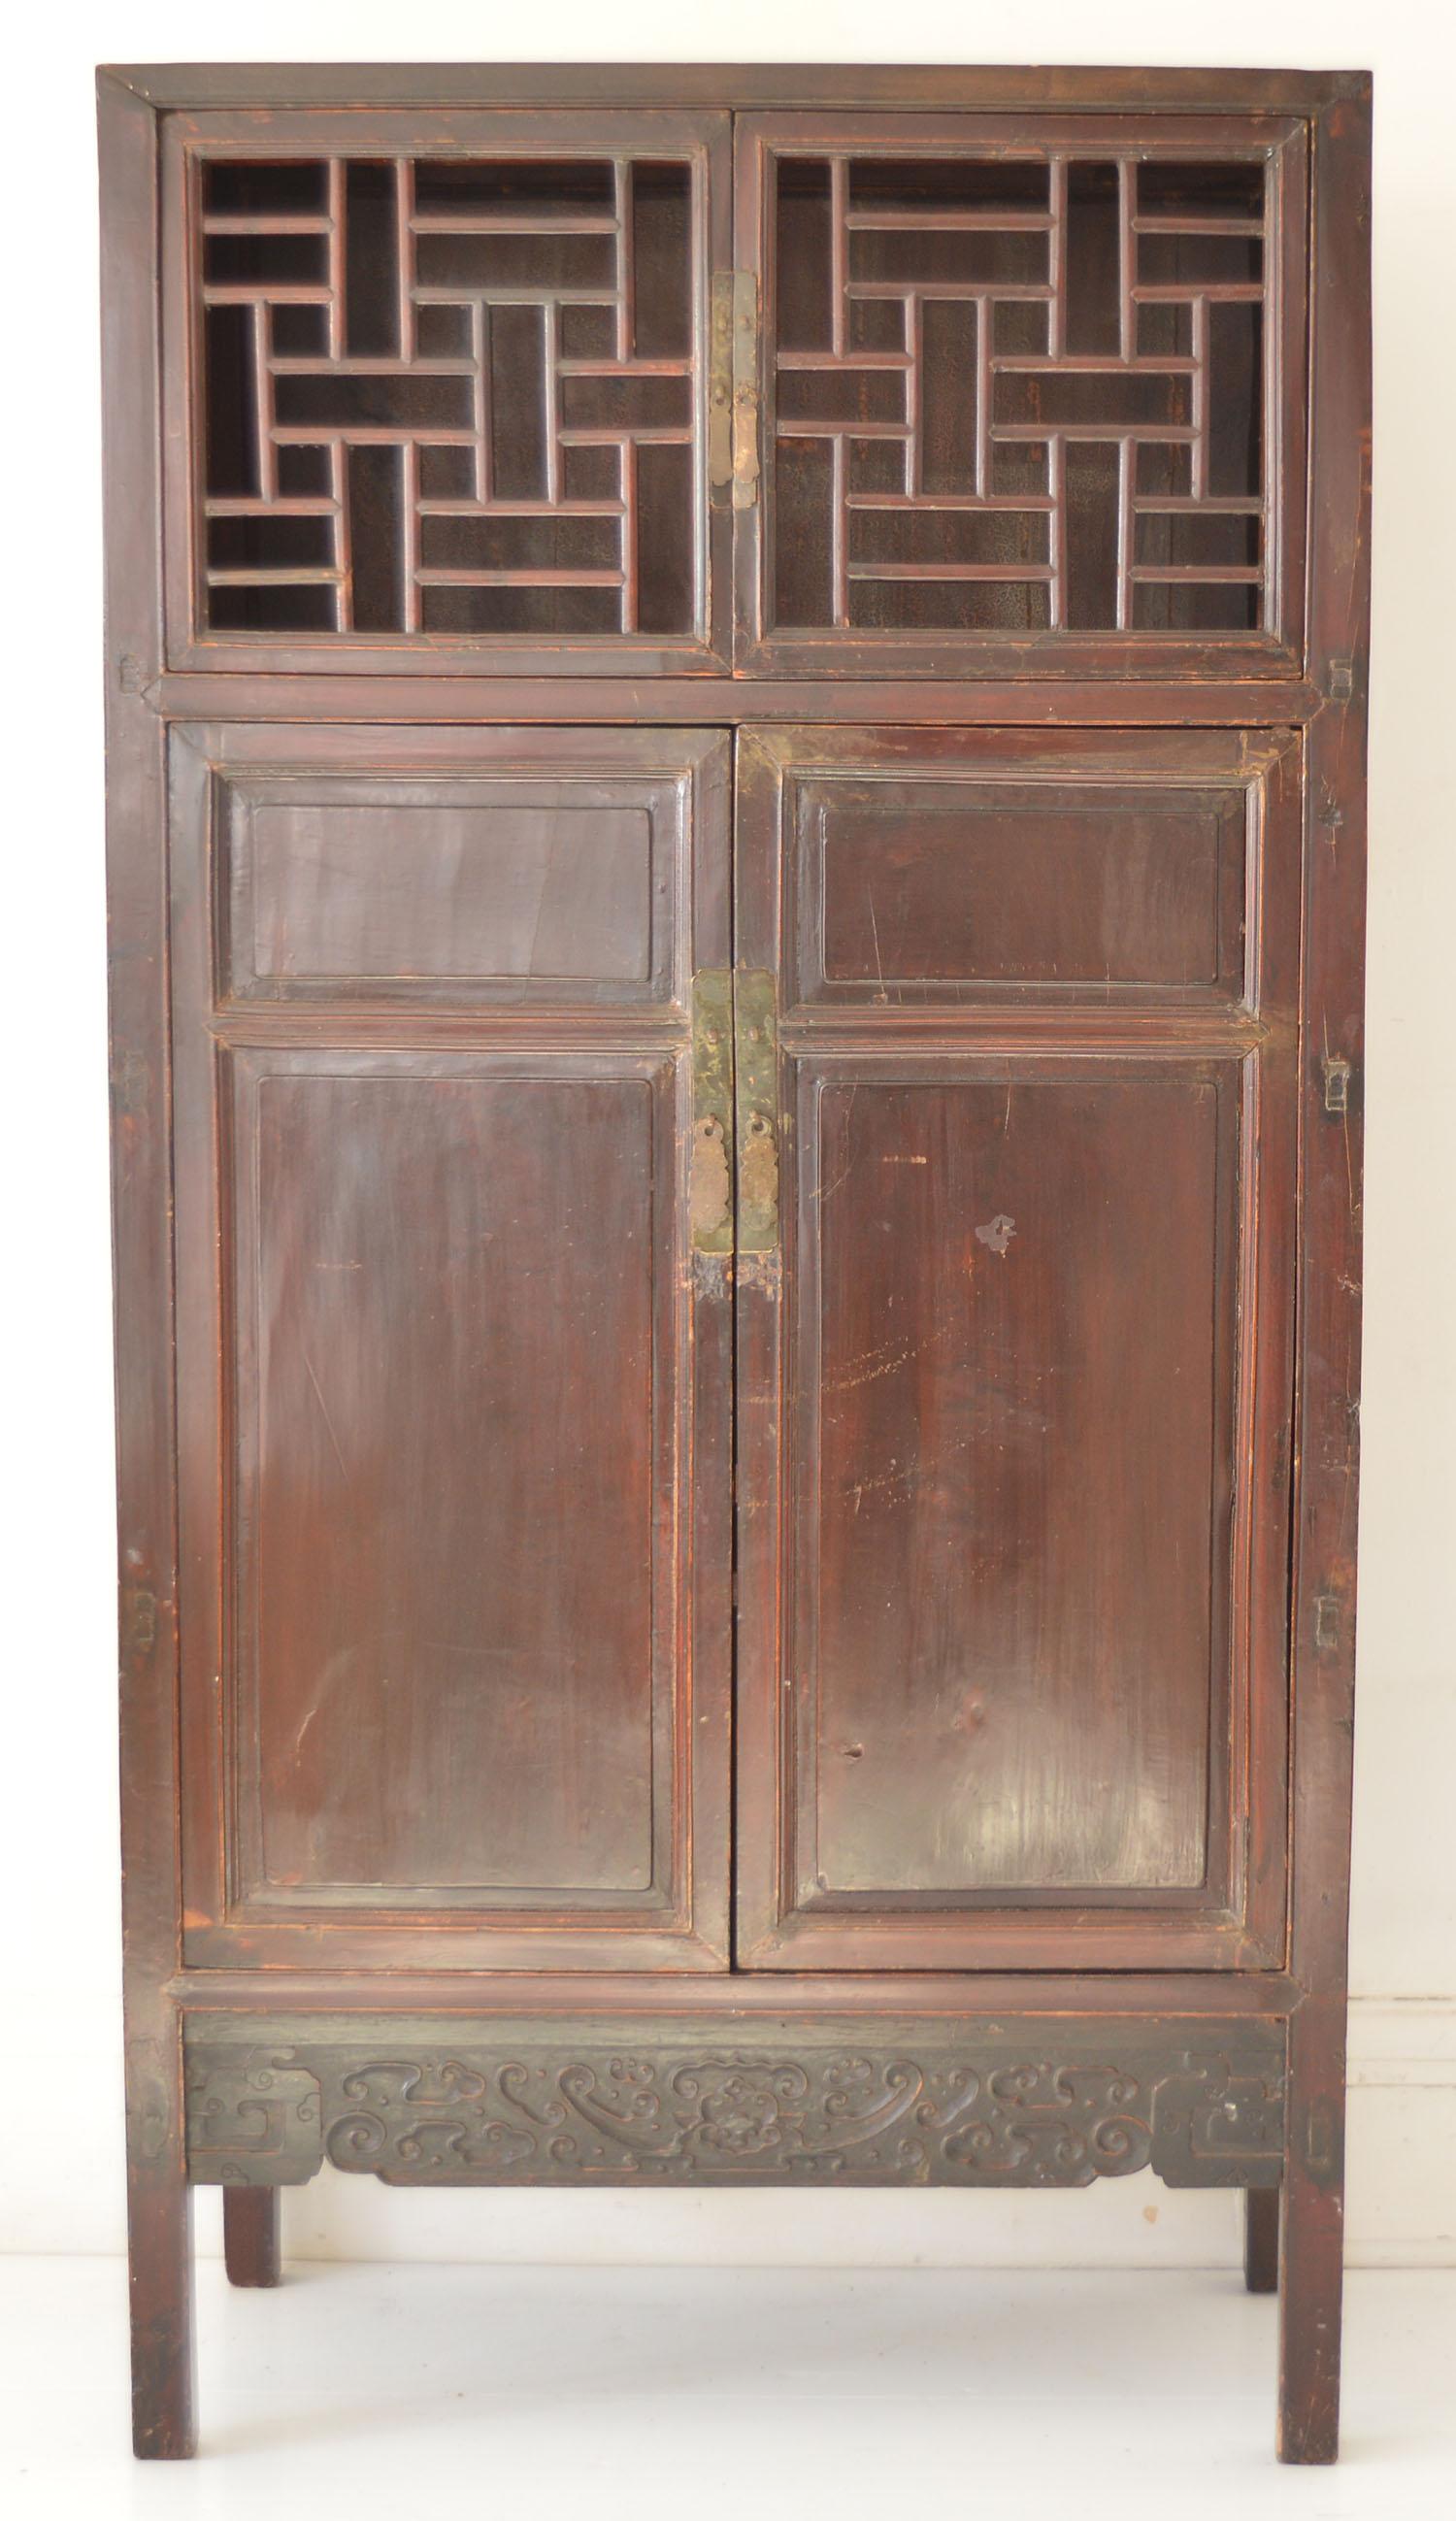 Great Chinese lacquered cabinet.

Slightly distressed rustic piece.

It is a decorators piece and not for the purist. There is evidence to suggest the lattice work is possibly a later adaptation. Maybe the drawers have been added.

I